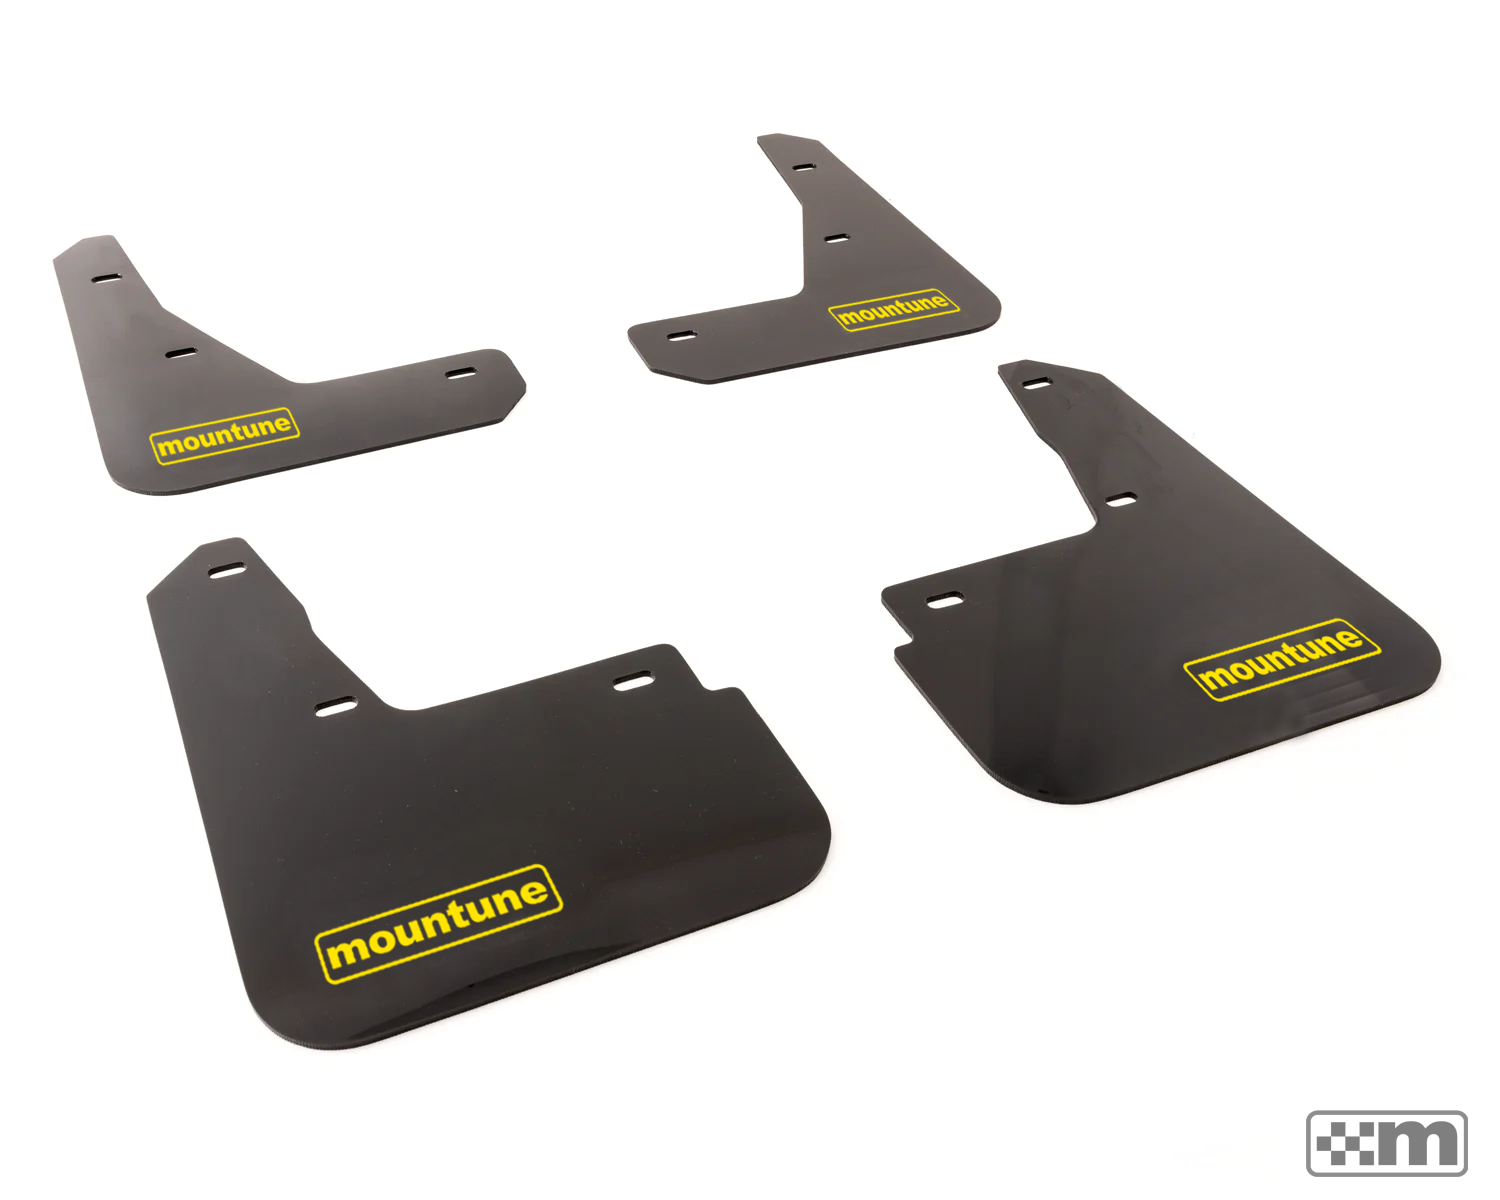 4x Car Mudguards Mud Flaps For Ford Focus Active MK4 2019~2023